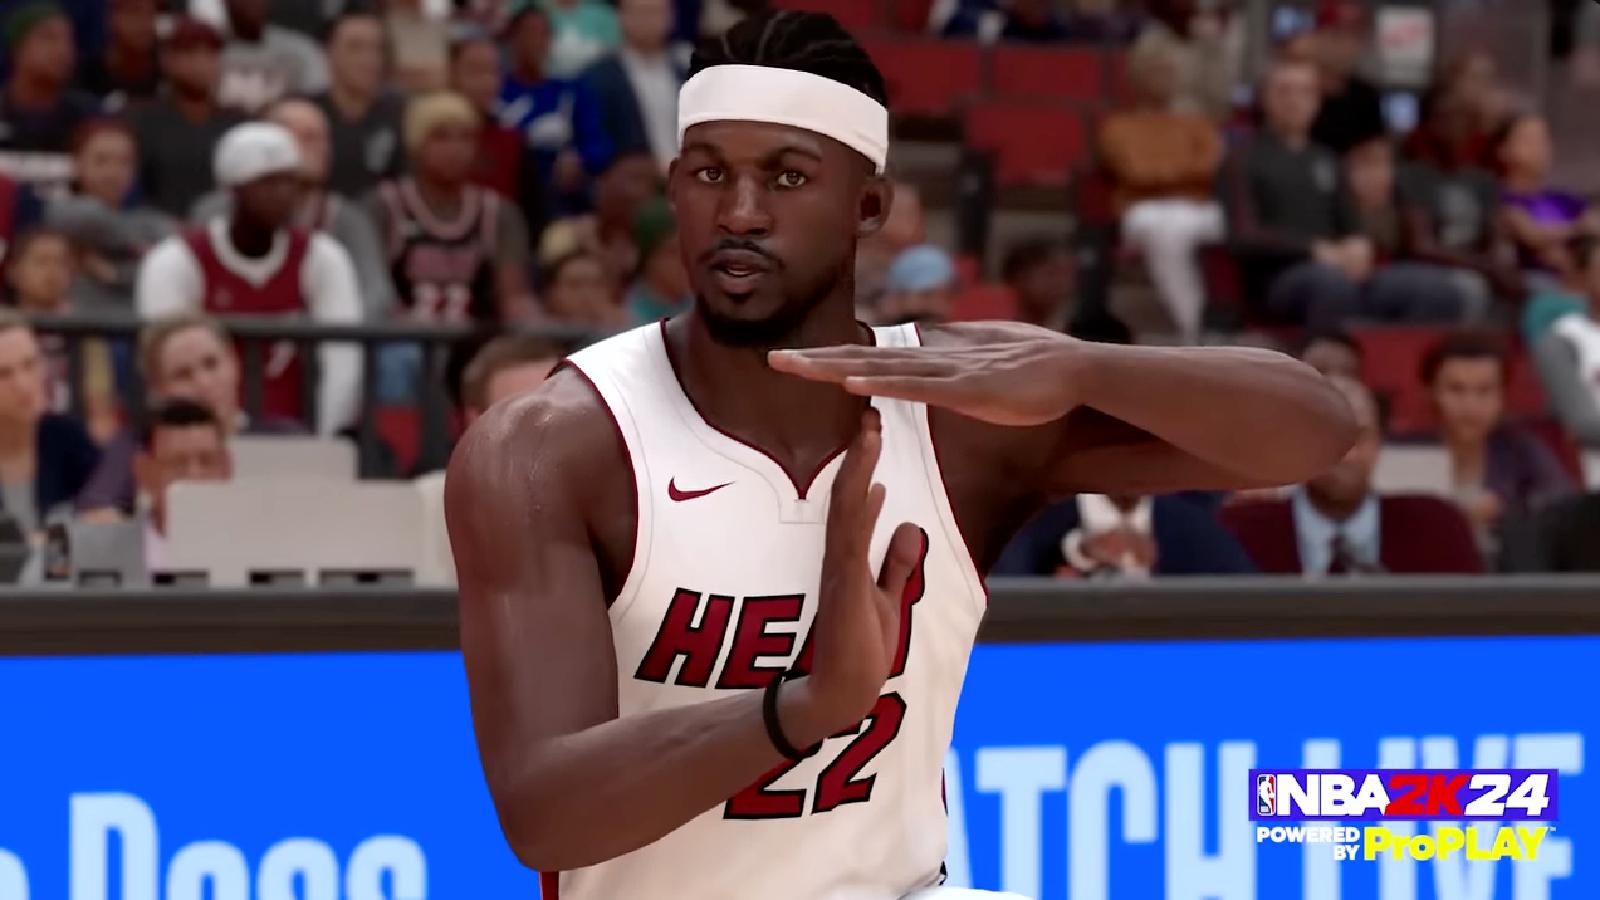 NBA 2K24 joins Overwatch 2 as the worst-rated games on Steam amid